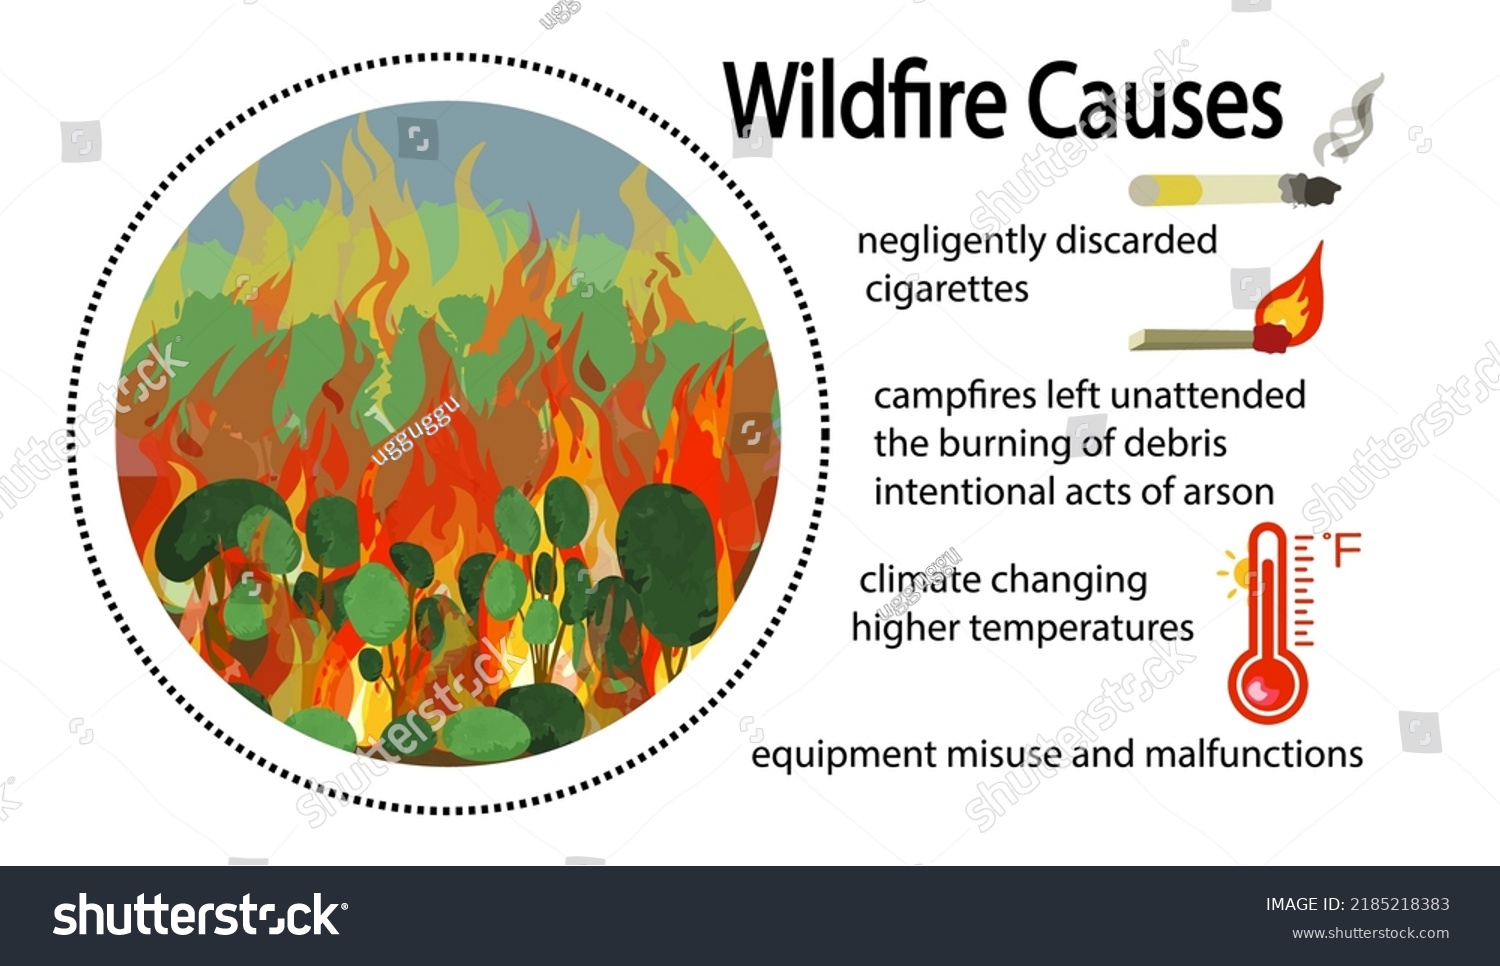 Wildfire Causes Vector Illustration Isolated On Stock Vector Royalty Free 2185218383 4051